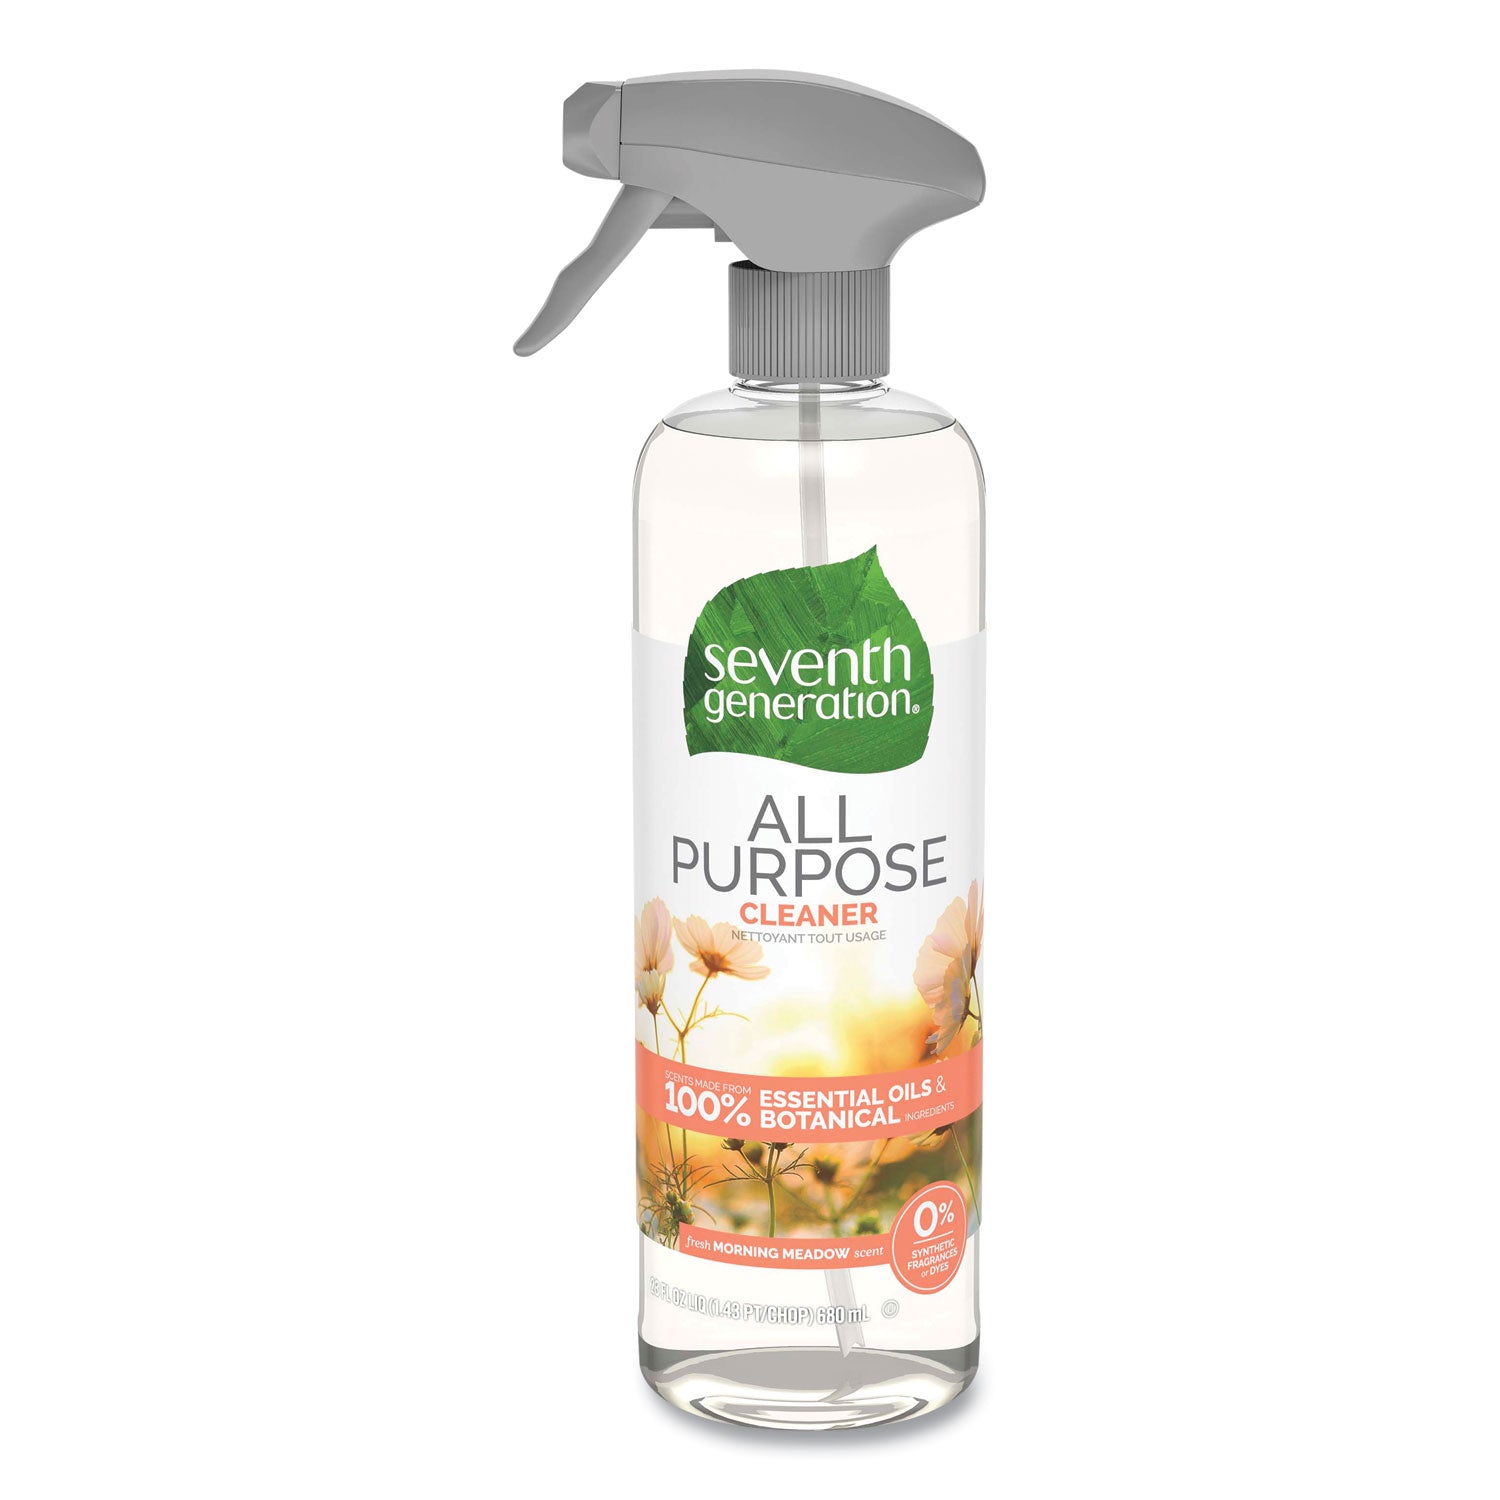 natural-all-purpose-cleaner-morning-meadow-23-oz-trigger-spray-bottle_sev44714ea - 1